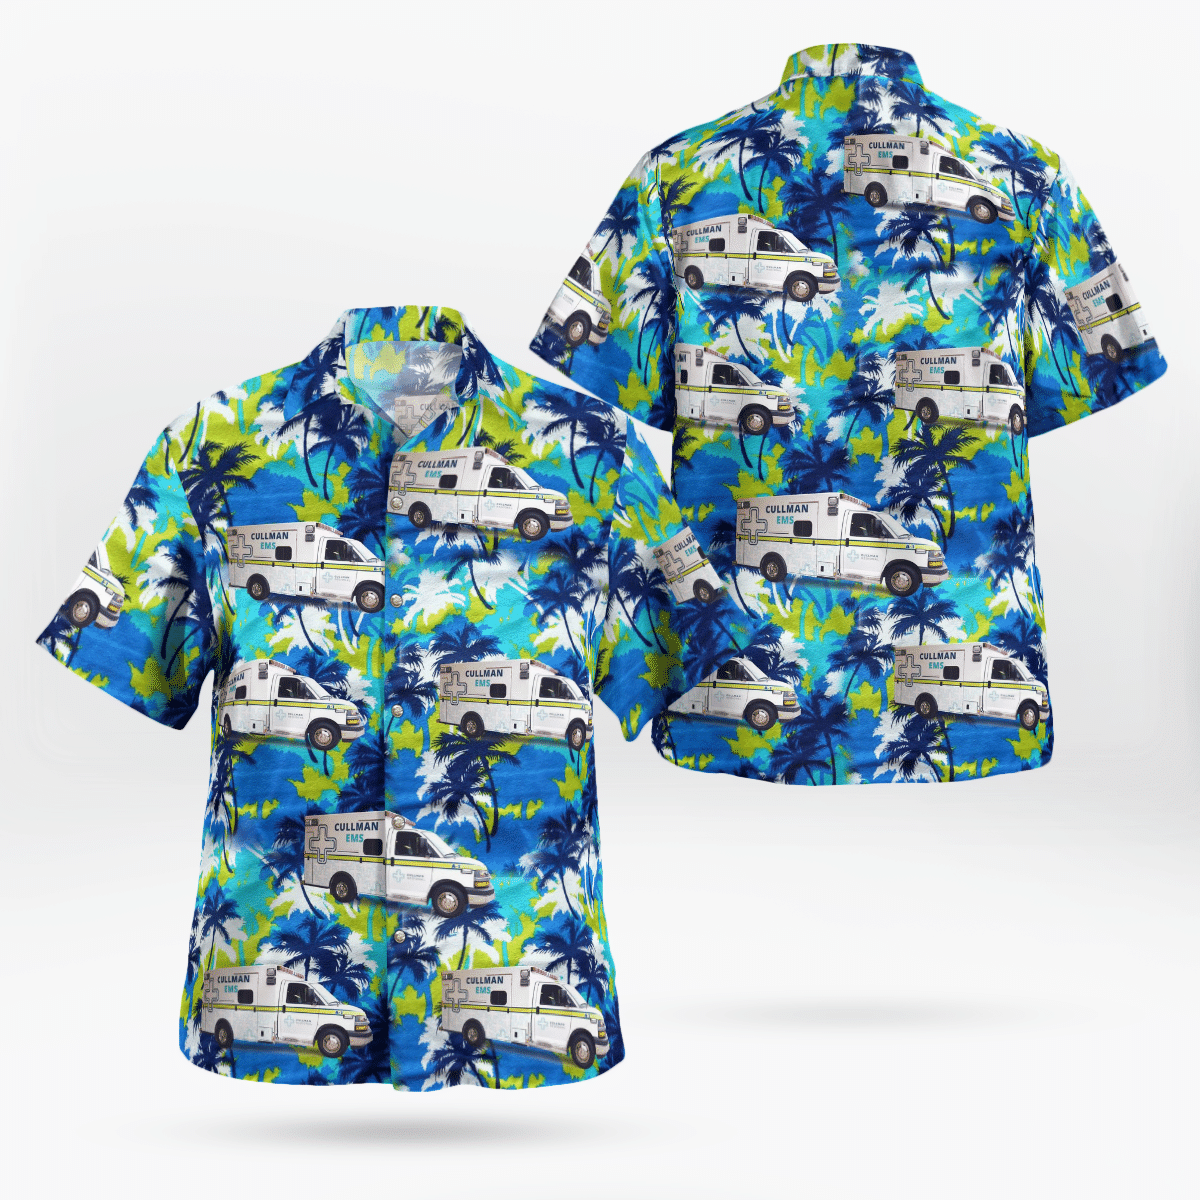 If you want to be noticed, wear These Trendy Hawaiian Shirt 112